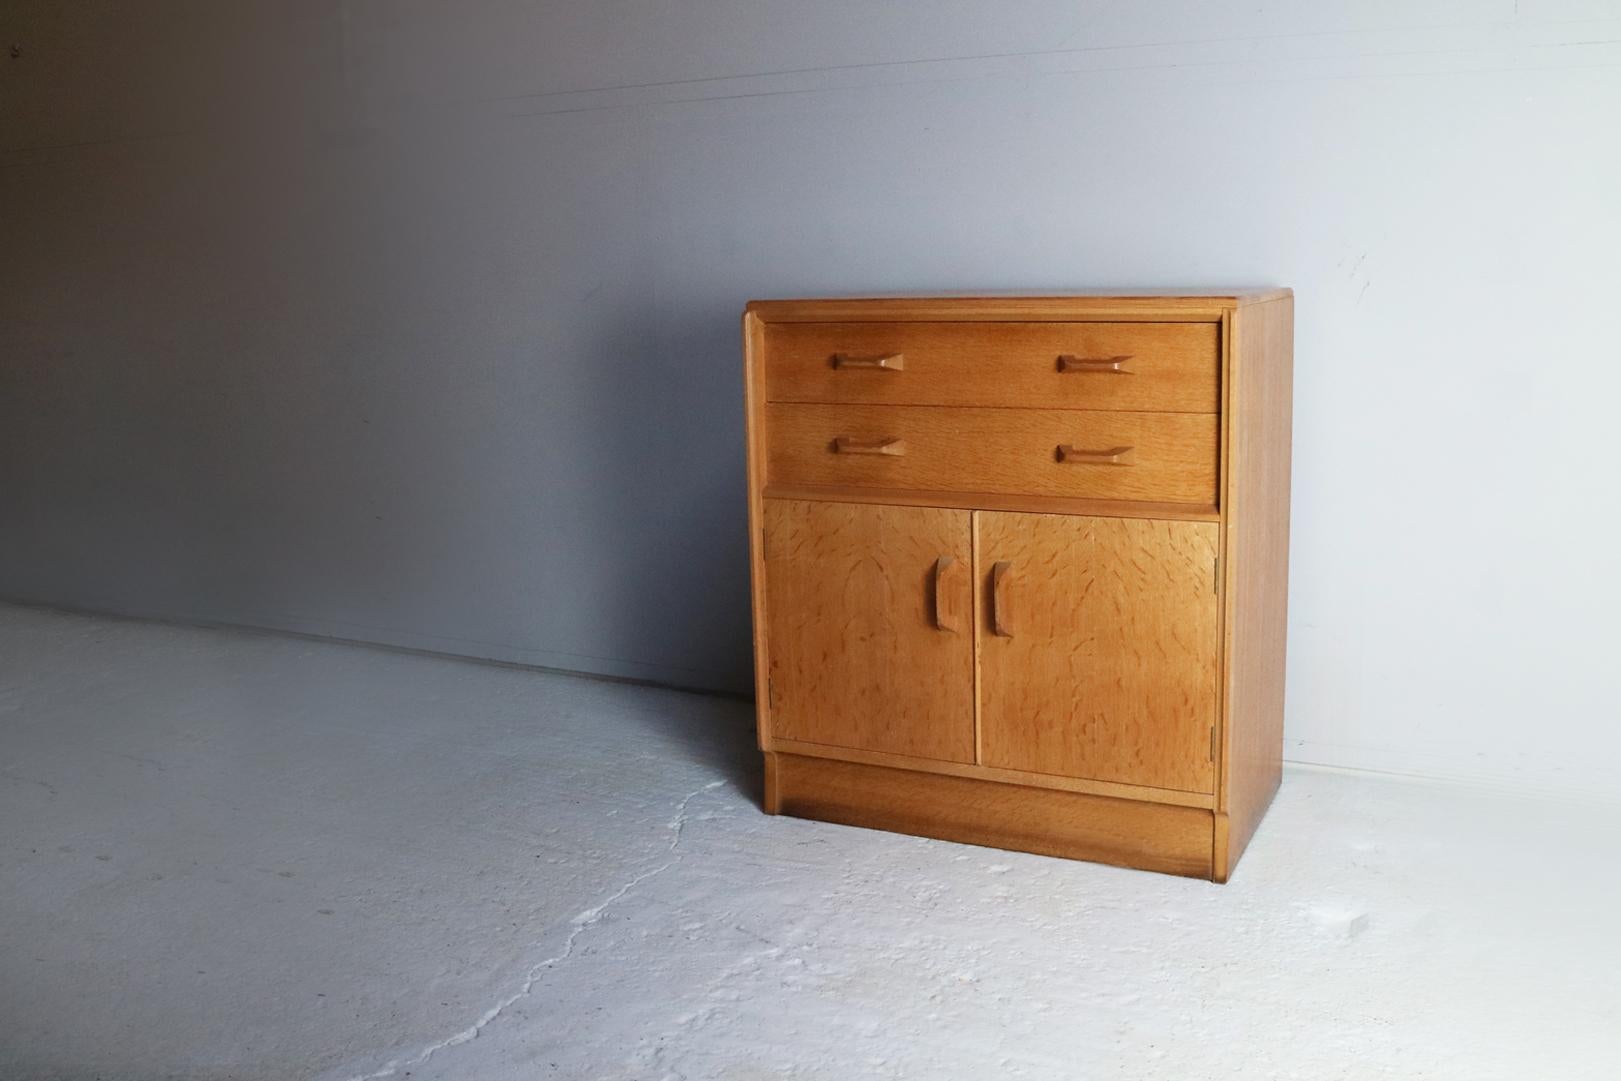 A lovely example of the early G Plan Brandon range. Produced before G Plan started to be influenced by Danish design, it is very English in character. Made with oak with 2 ‘set back’ top drawers which is a feature of this range. In great condition.